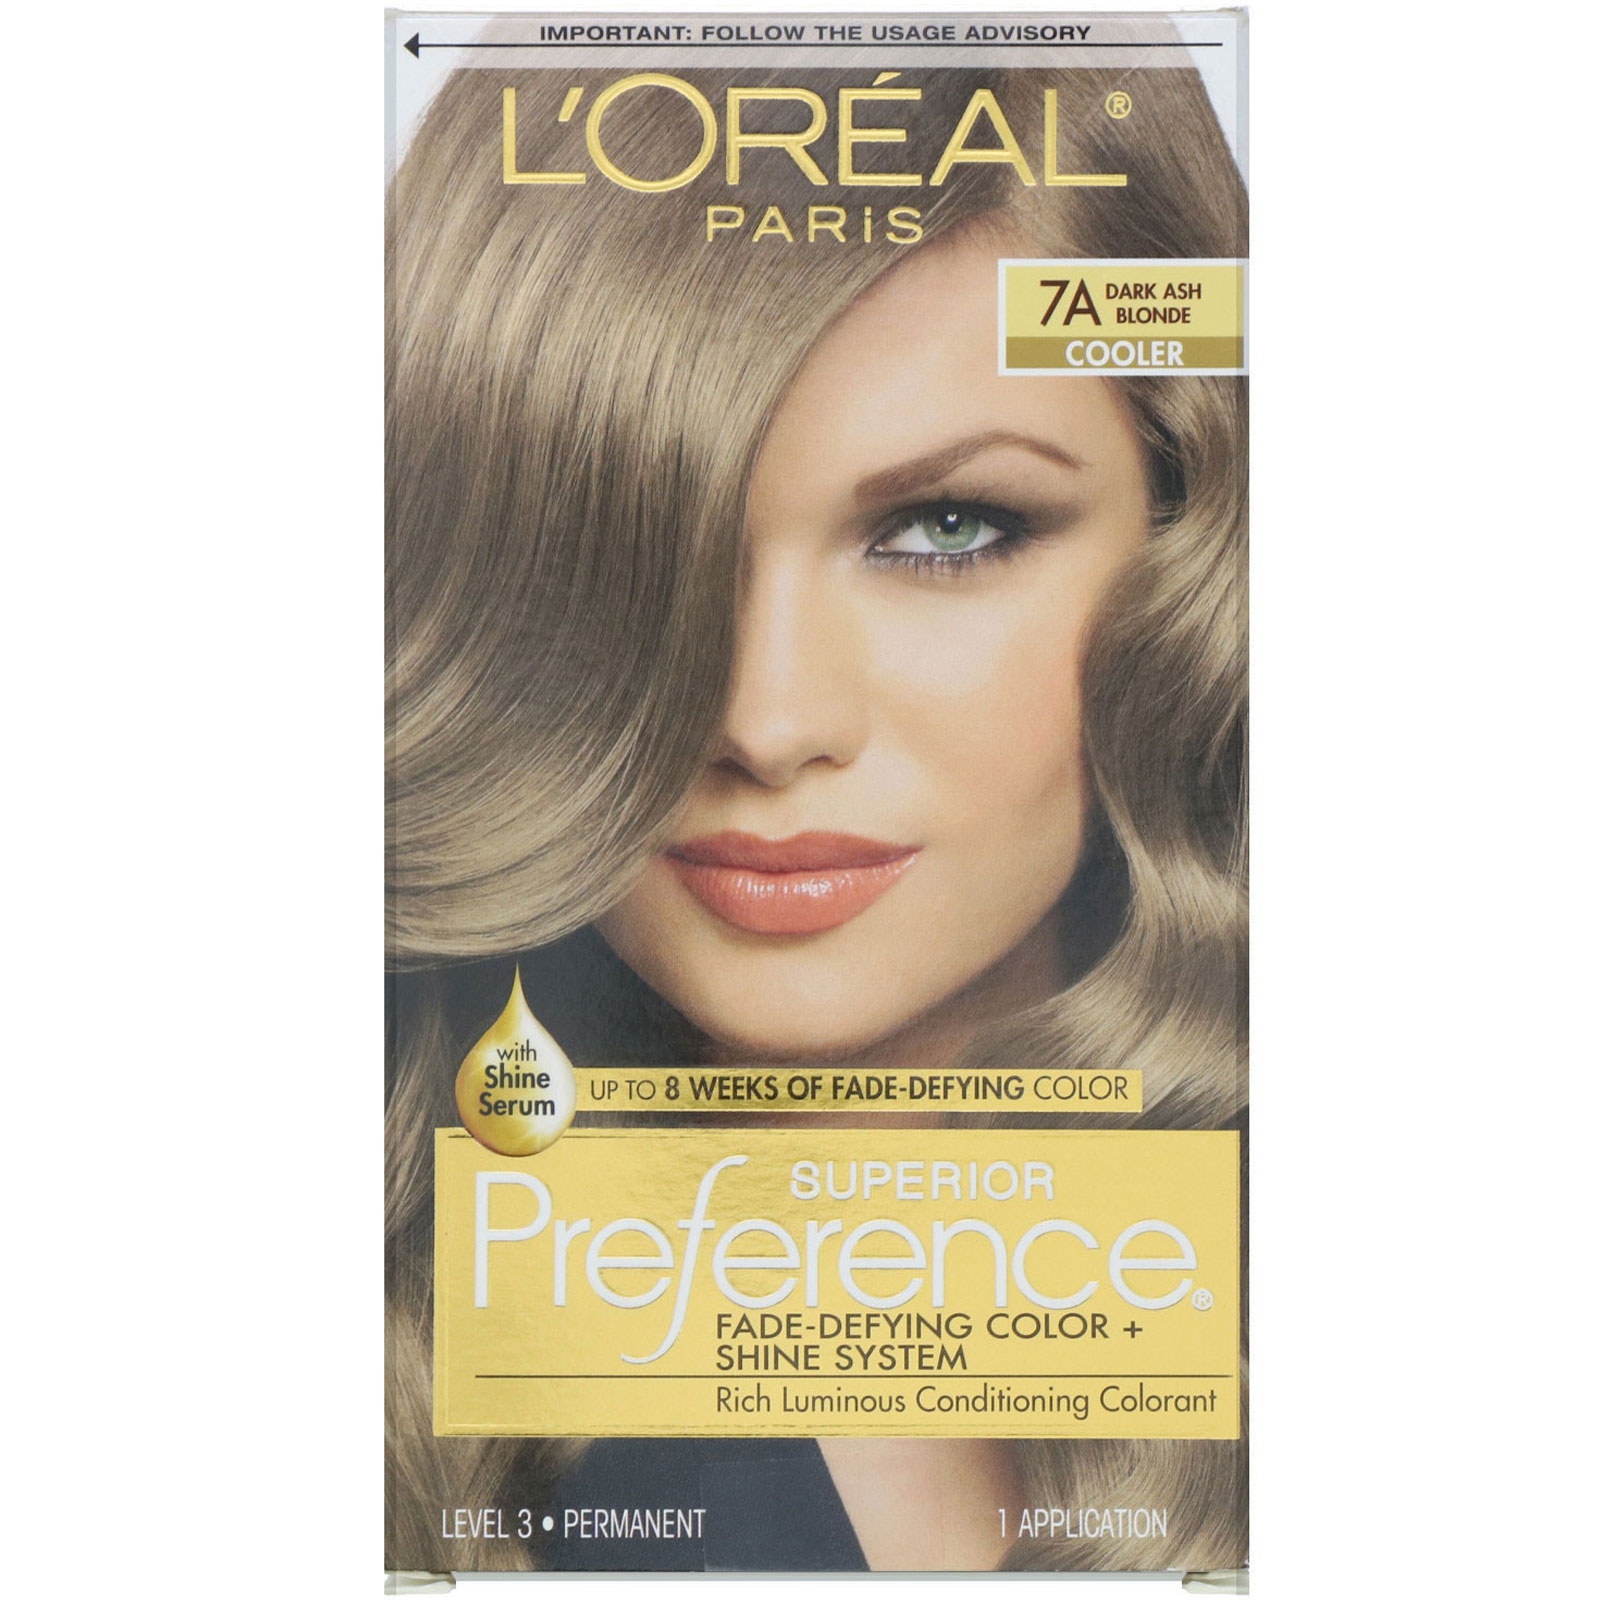 L'Oreal, Superior Preference, Fade-Defying Color + Shine System, Cooler